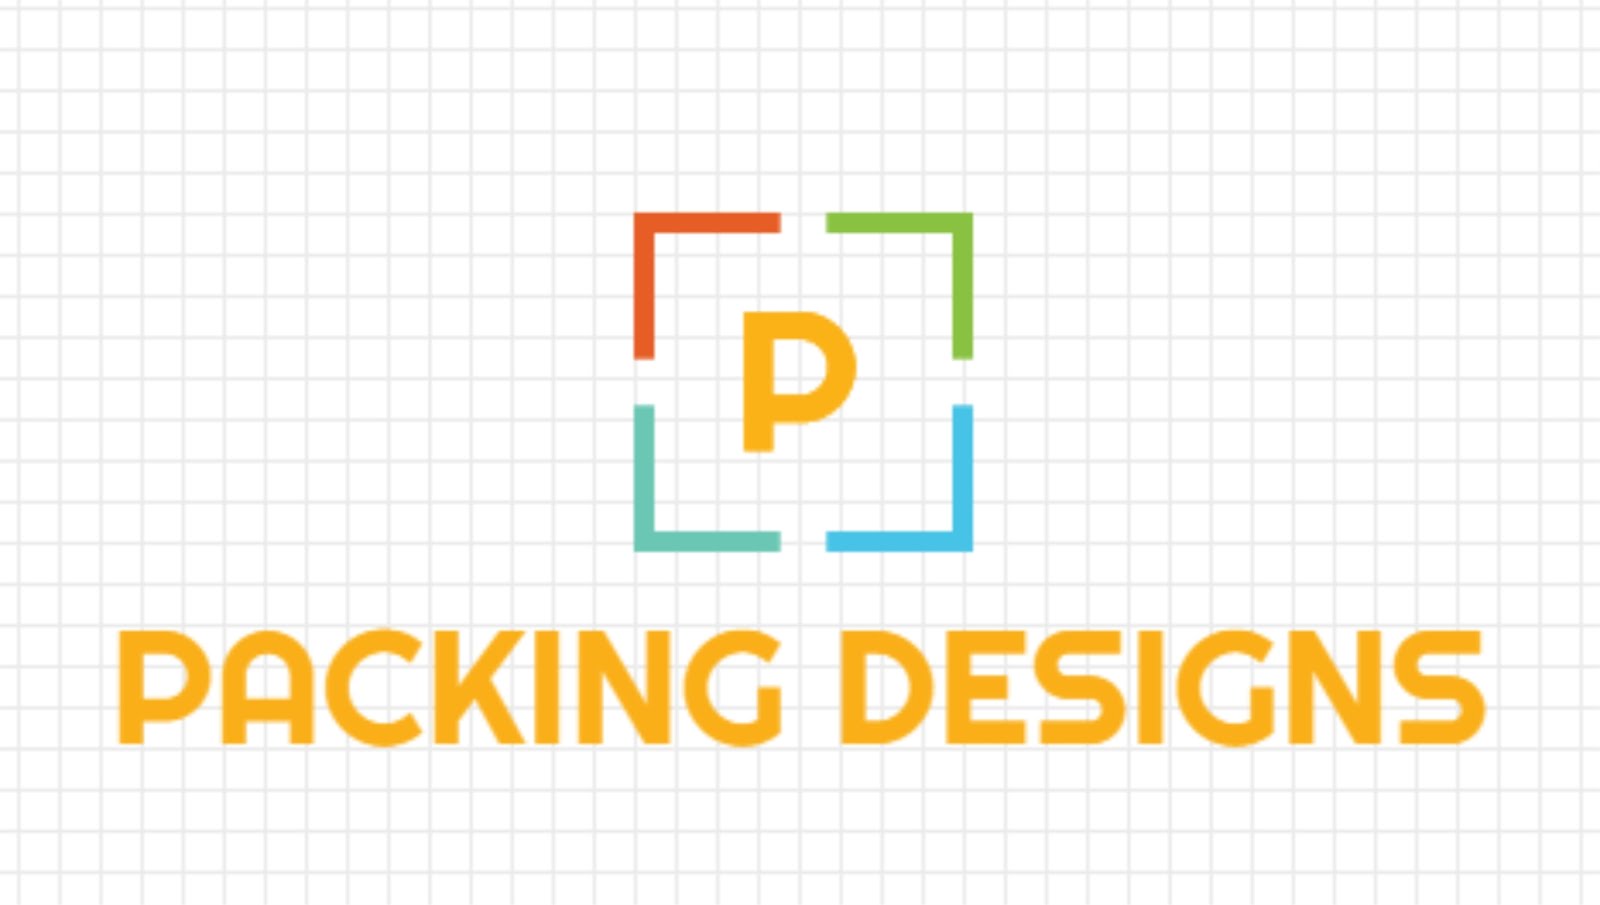 PACKING DESIGNS